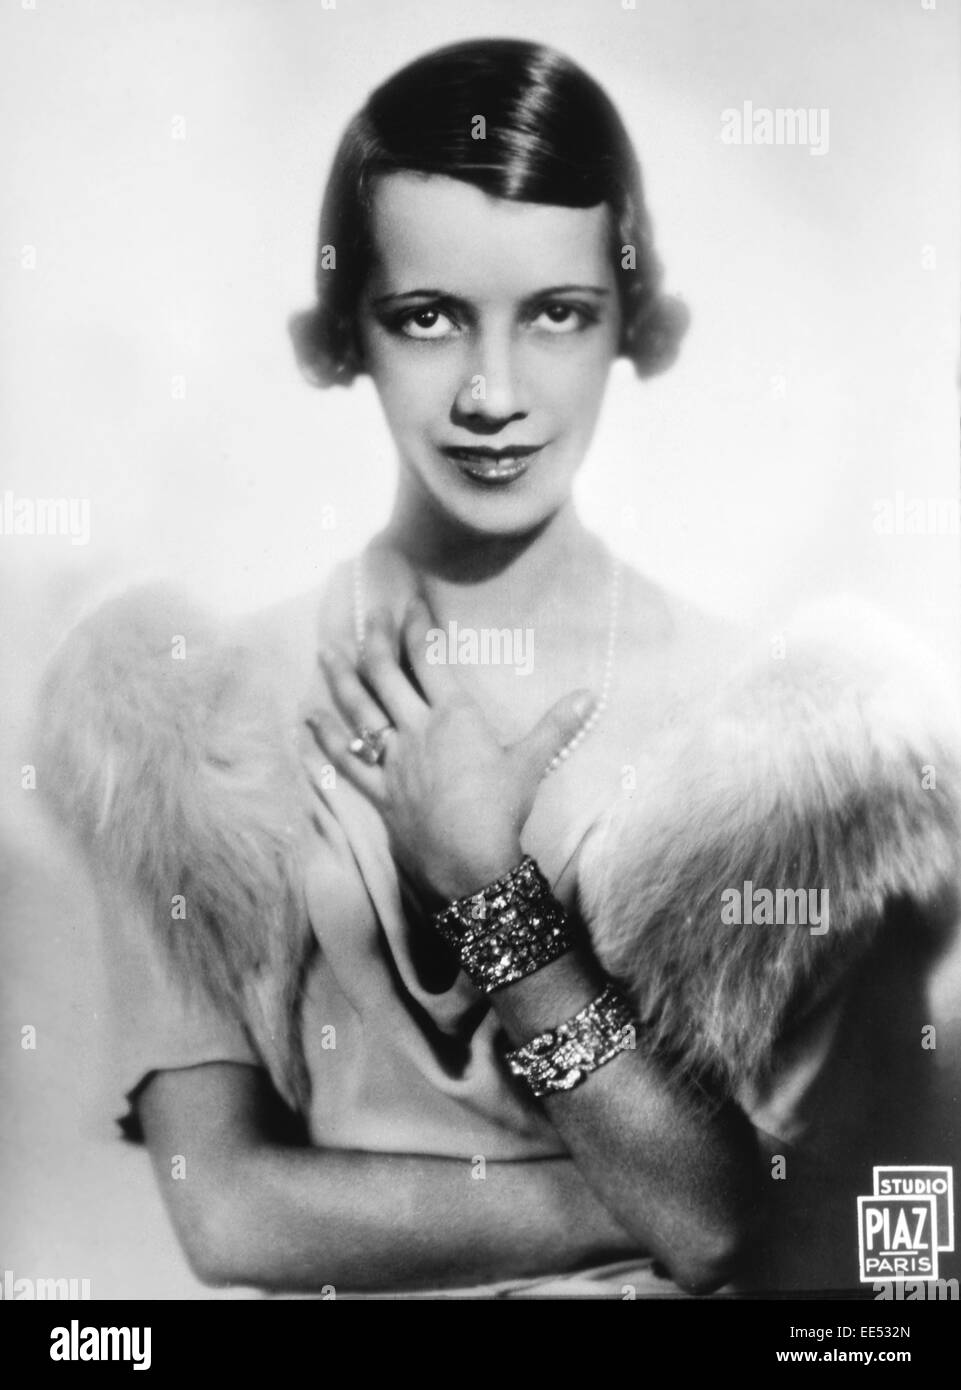 Lily Pons (1898-1976), French-American Soprano Singer and Actress, Portrait, circa 1930 Stock Photo